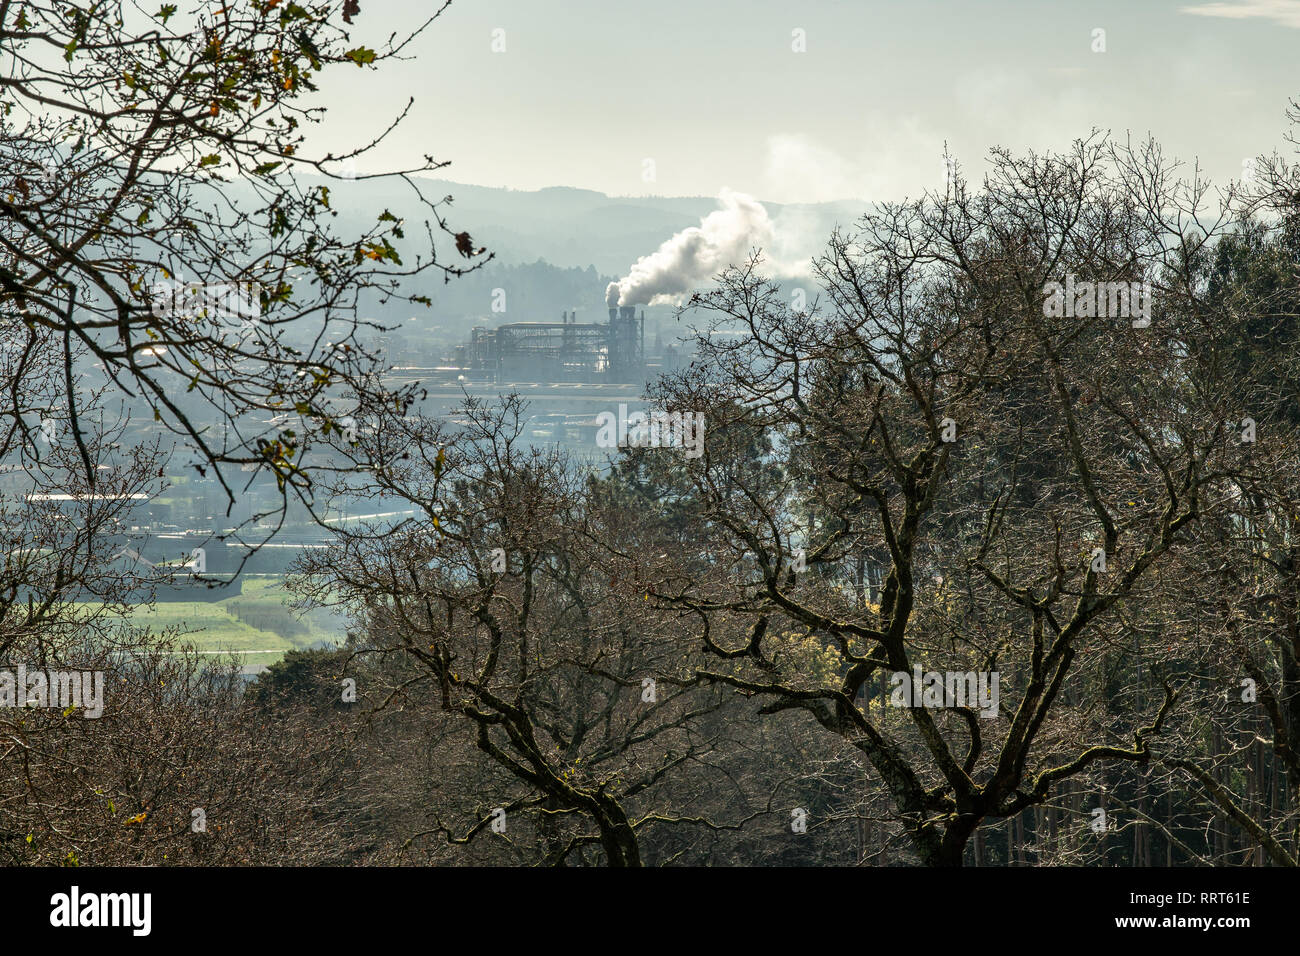 Industrial landscape. Scene of Trees and a Factory emitting smoke polluting the atmosphere. Pollution concept Stock Photo